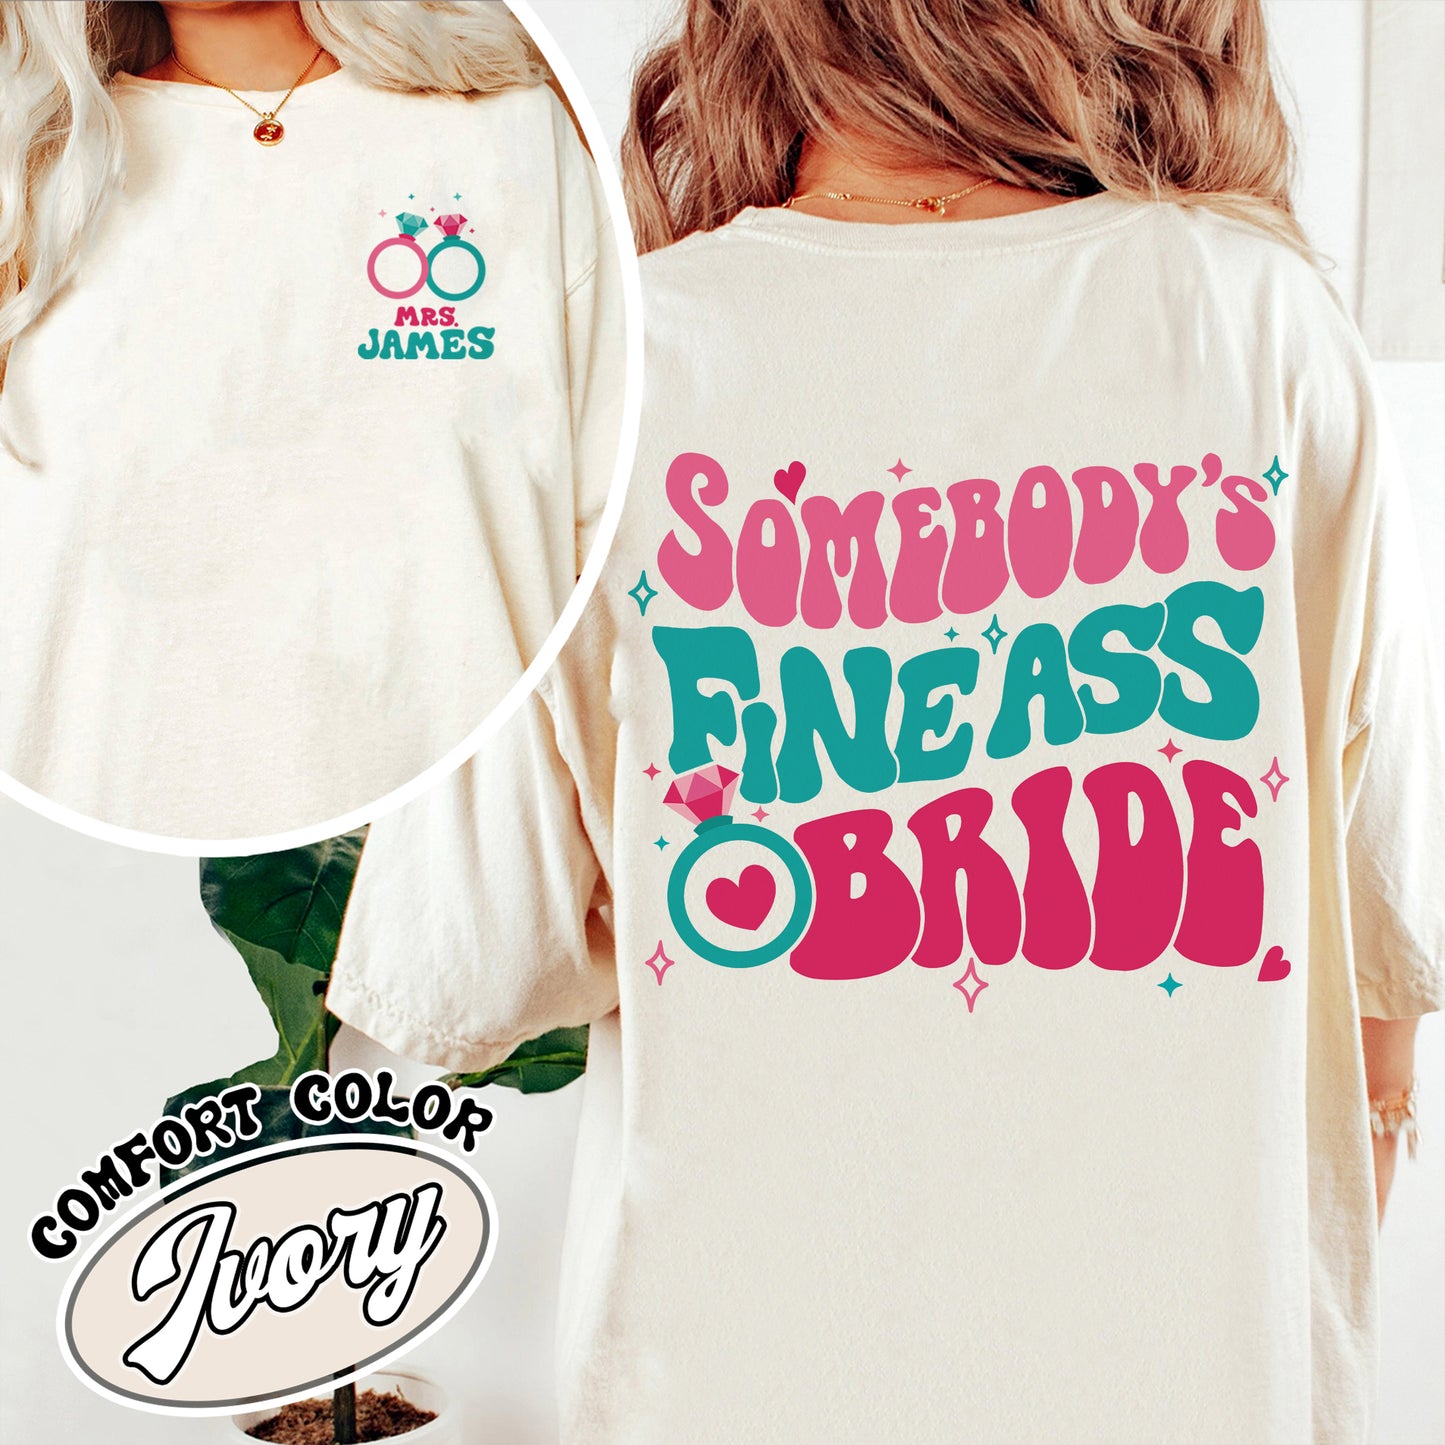 Somebody’s Fine Ass Bride Comfort Color Shirt, Bride Era, Custom Bride, Oversized Shirt Bride, Bride To Be Shirt